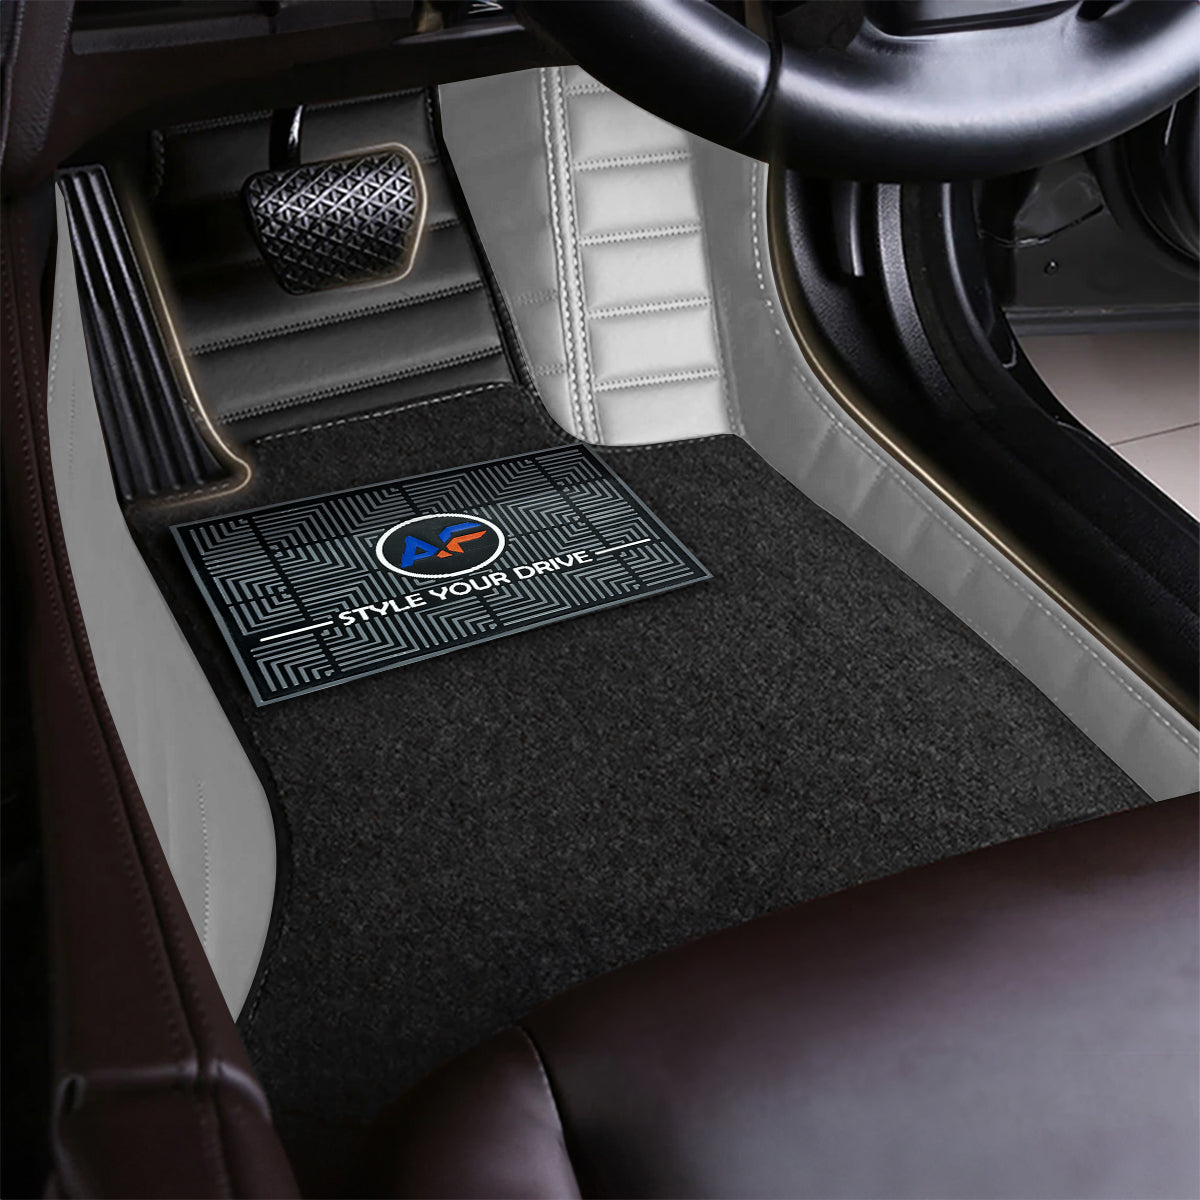 Autofurnish 9D Combination Custom Fitted Car Mats For Mercedes GLC Coupe 300d 4MATIC 2020 - Black VT-Coffee